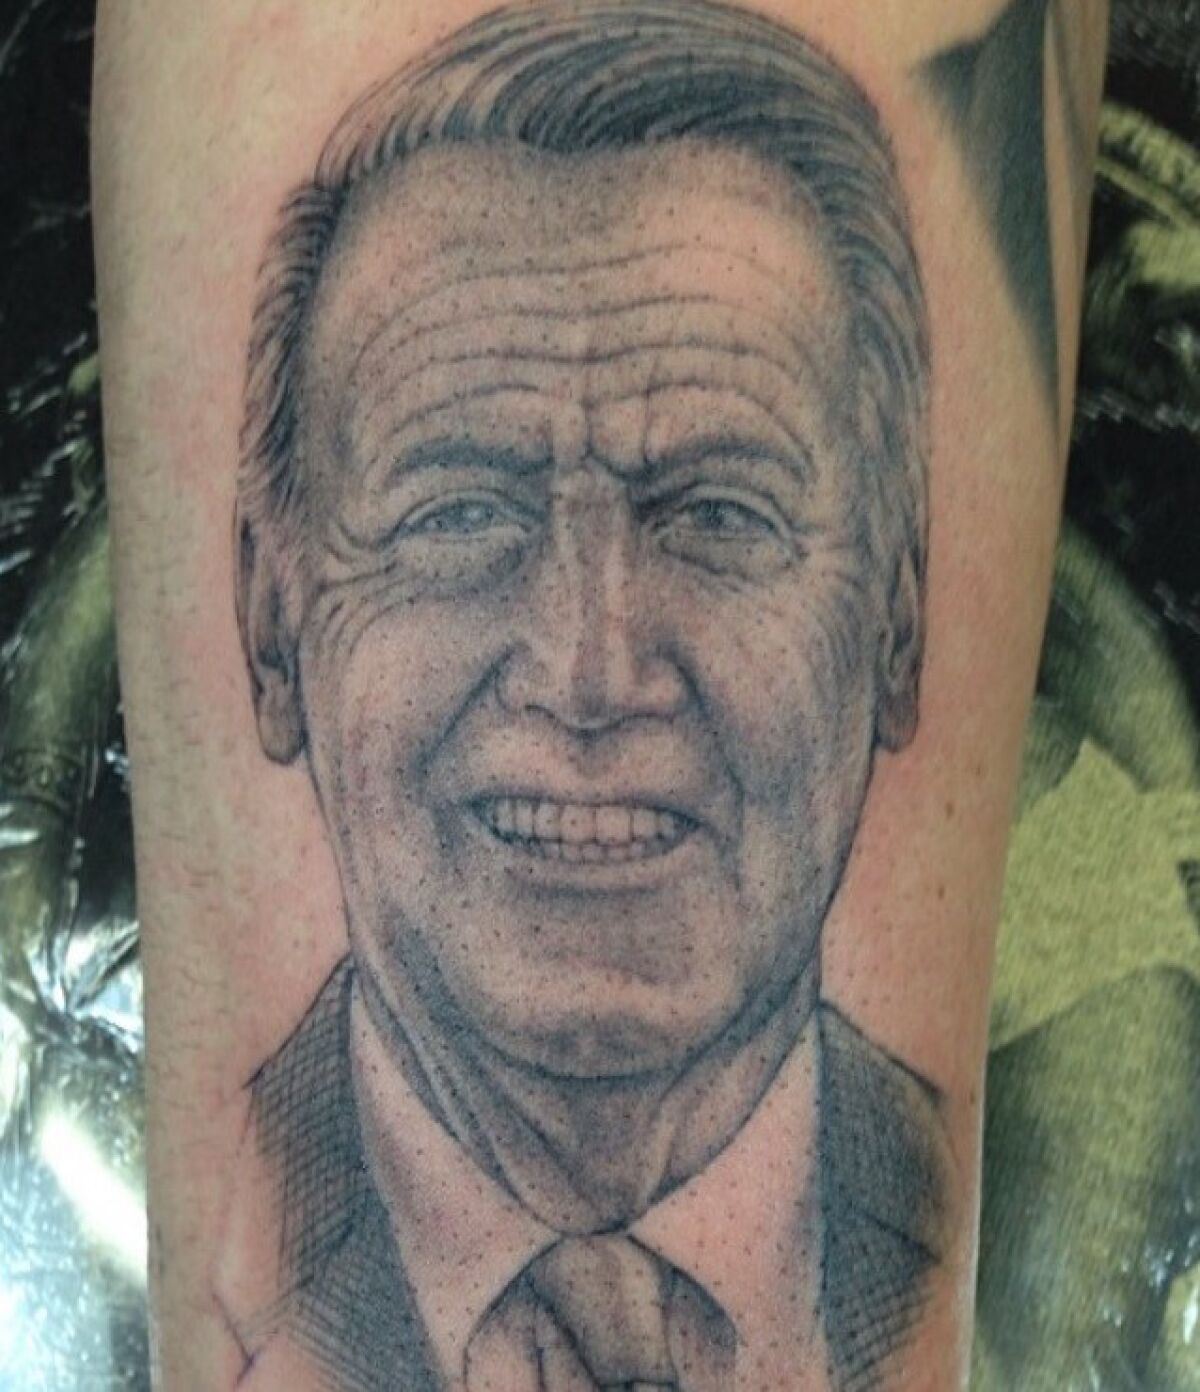 Richie Abbott has a tattooed tribute to Vin on his arm.